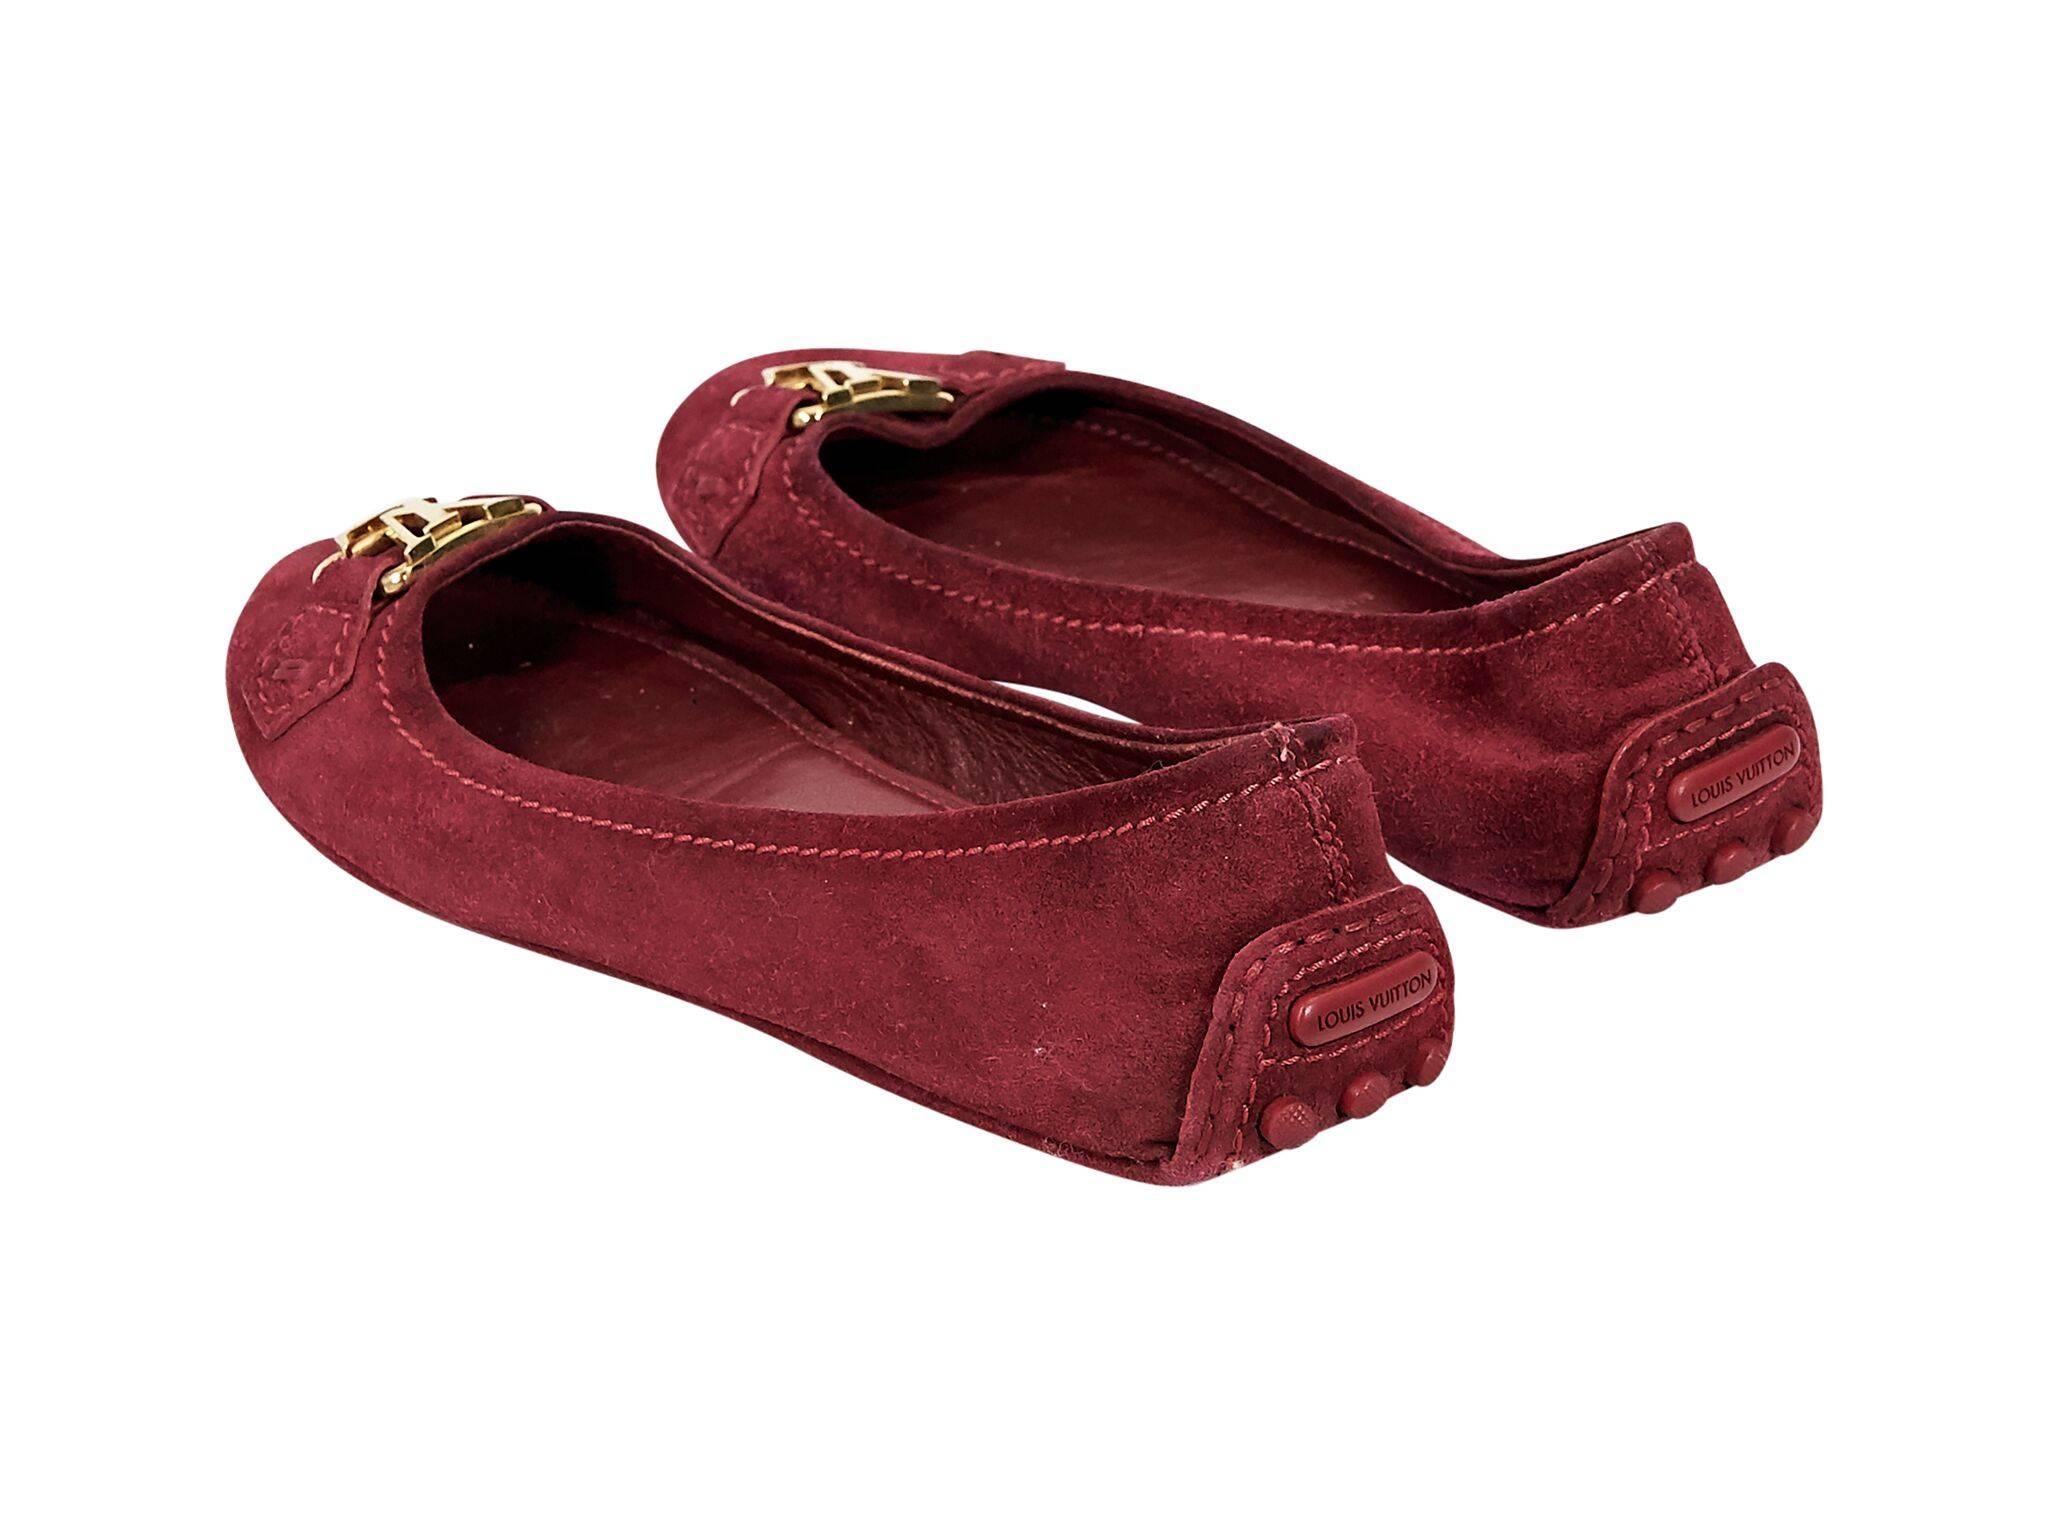 Product details:  Red suede driving loafers by Louis Vuitton.  Logo hardware accents vamp.  Round toe.  Goldtone hardware.  Slip-on style.
Condition: Pre-owned. Good.
Est. Retail $798